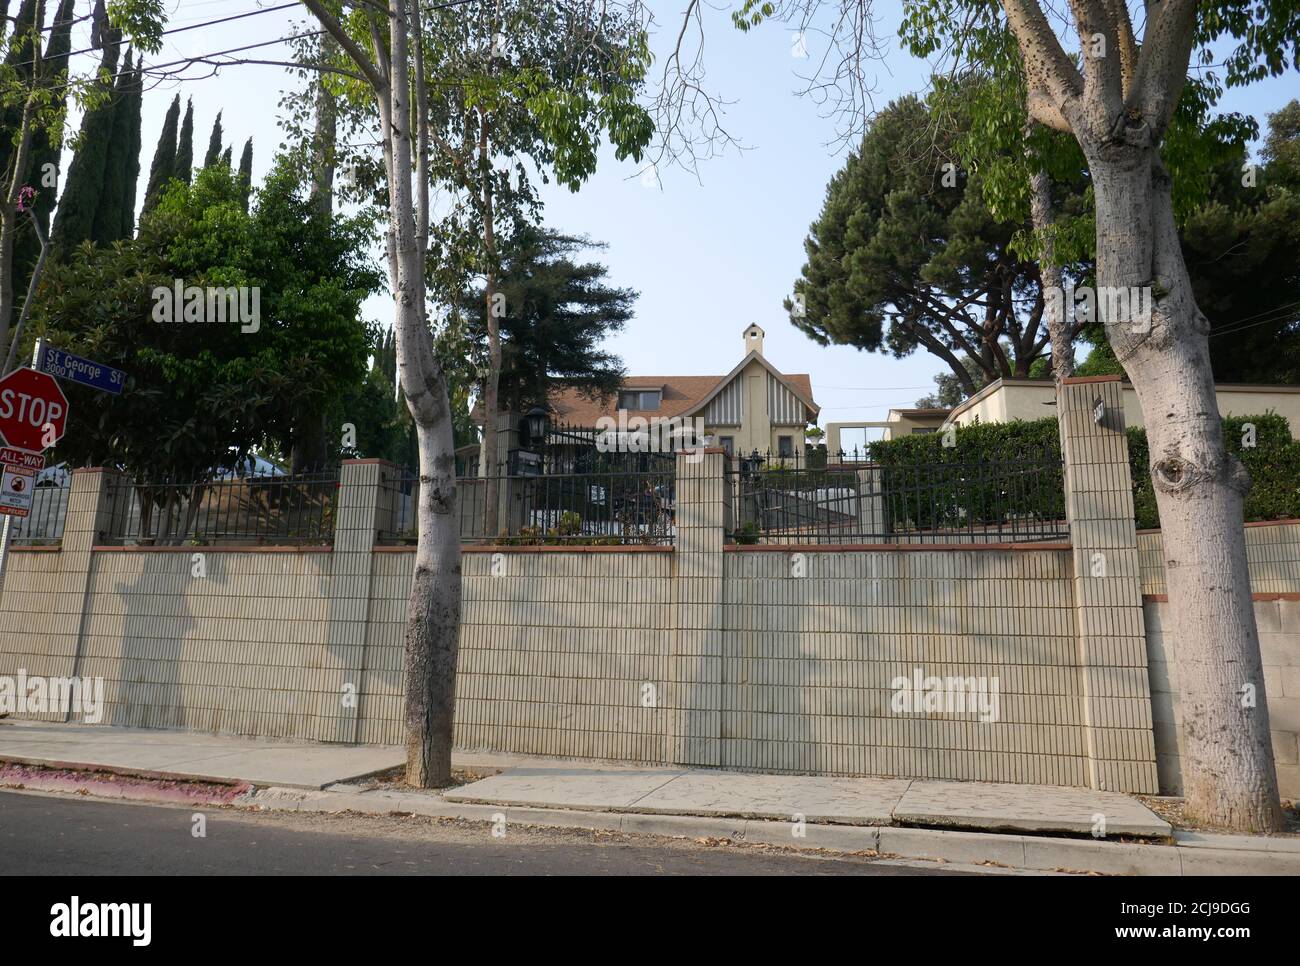 Los Angeles, California, USA 14th September 2020 A general view of atmosphere of Leno LaBianca and Rosemary LaBianca's Former Neighbor, where Manson gang attended a party before the LaBianca Murders at 3267 Waverly Drive on September 14, 2020 in Los Angeles, California, USA. Photo by Barry King/Alamy Stock Photo Stock Photo